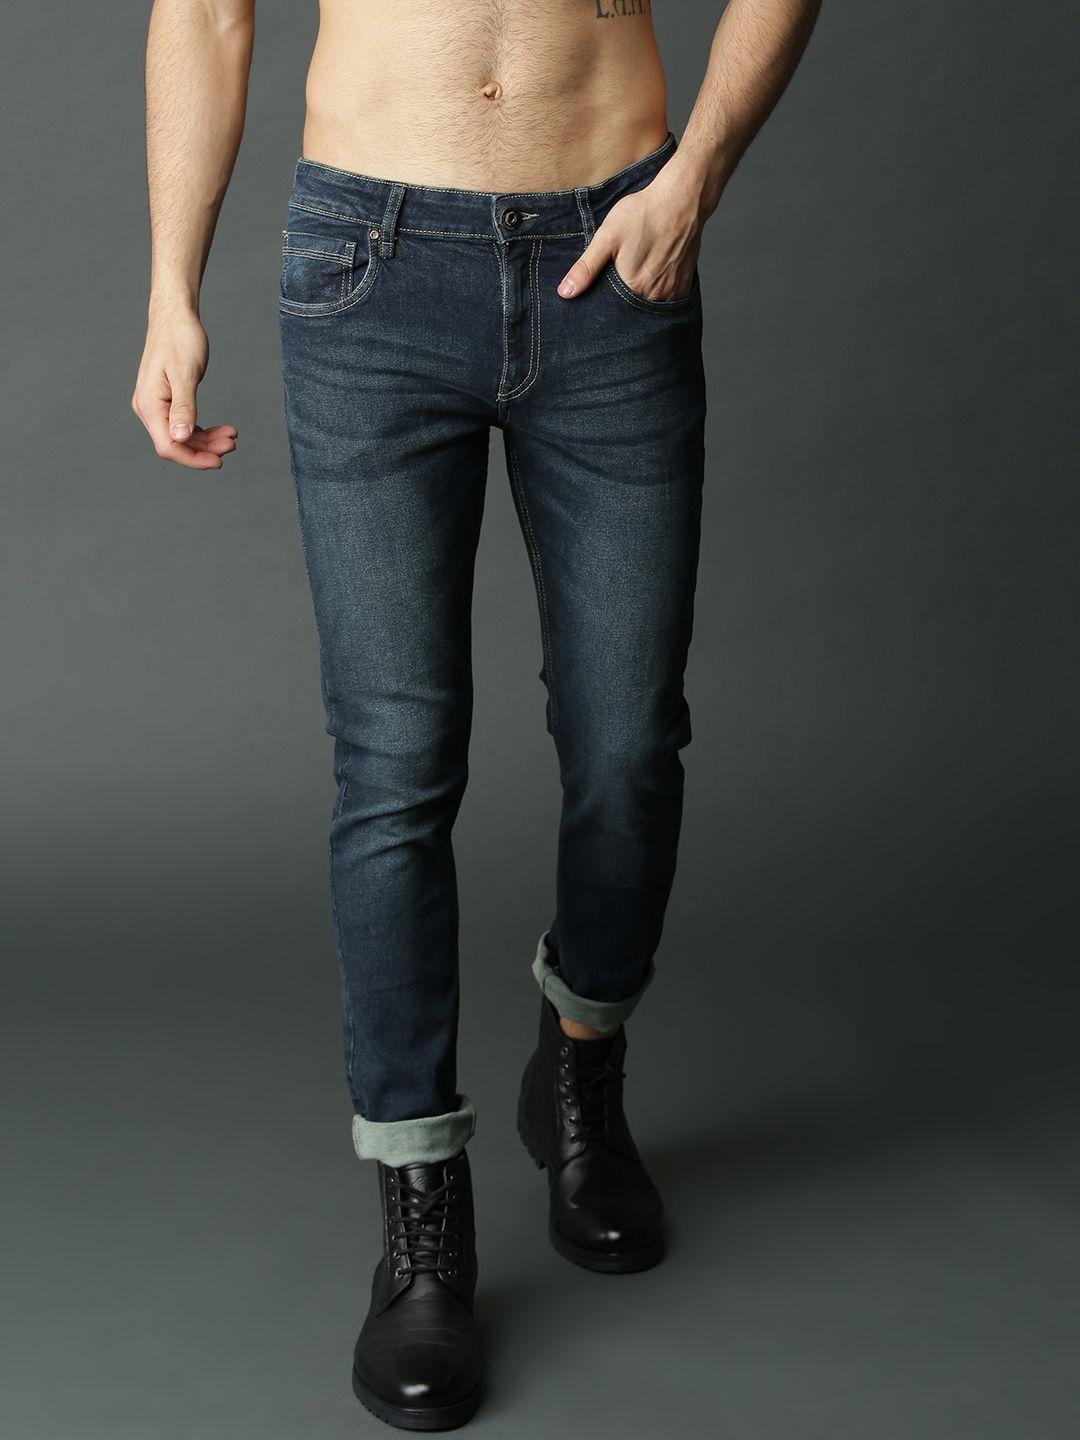 roadster-men-navy-blue-skinny-fit-mid-rise-clean-look-stretchable-jeans